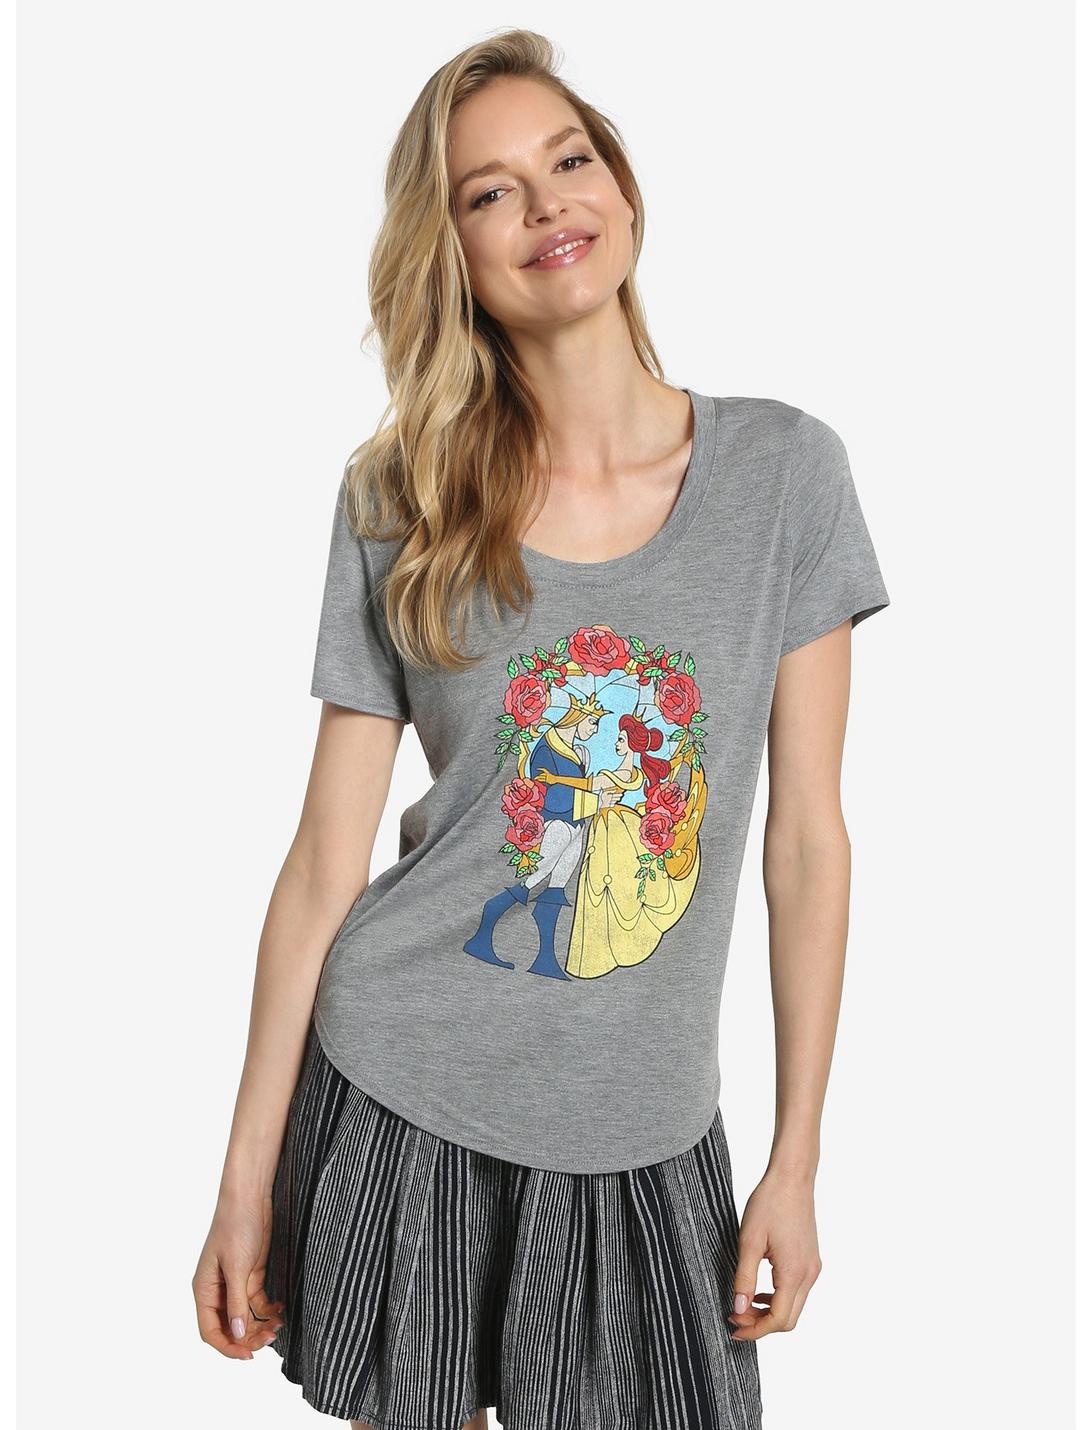 Disney Beauty And The Beast Stained Glass Womens Tee, GREY, hi-res